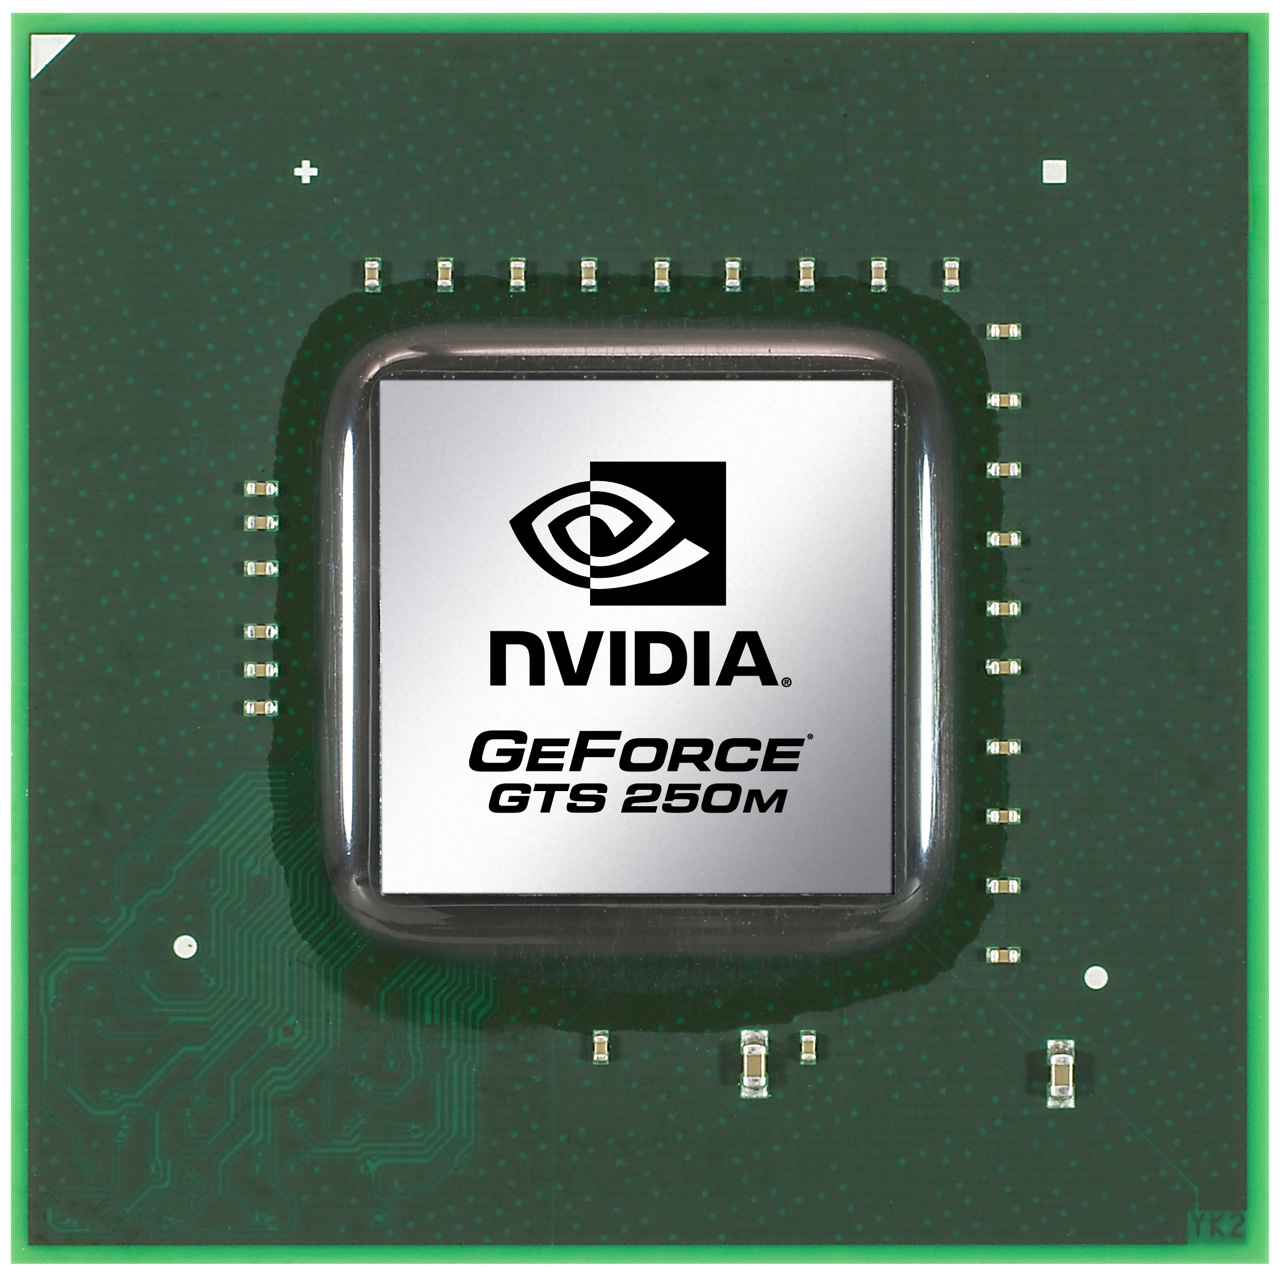 is the nvidia geforce go 7300 windows 7 compatible